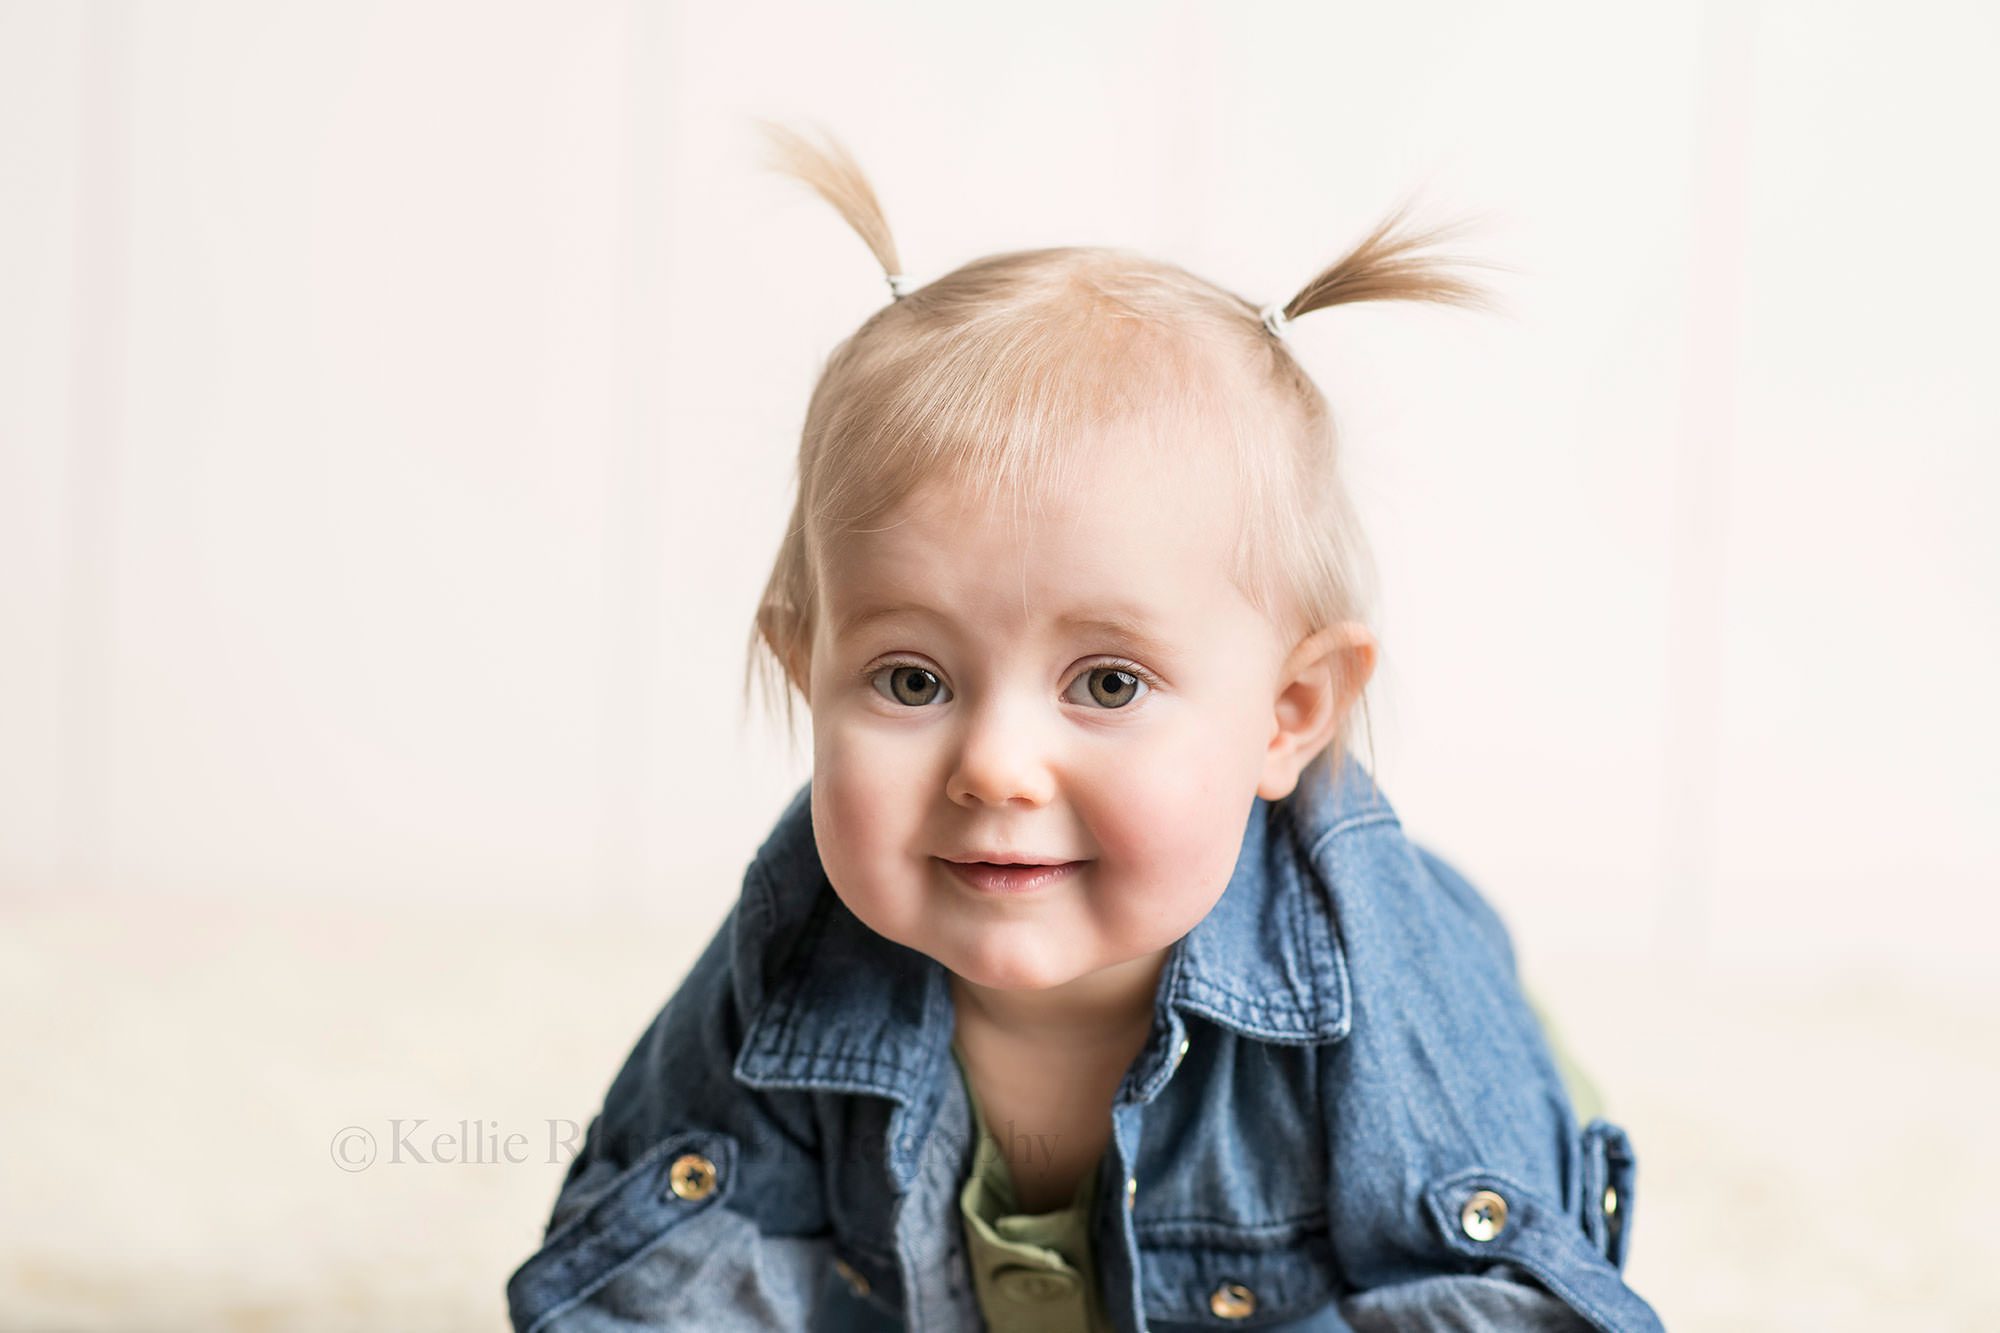 floral milestone session a one year old girl from kenosha in a photographers studio in Milwaukee Wisconsin She is wearing a denim shirt with buttons and a green dress. one year old is in front of a cream backdrop she has pigtails and the photo is a close up of her face